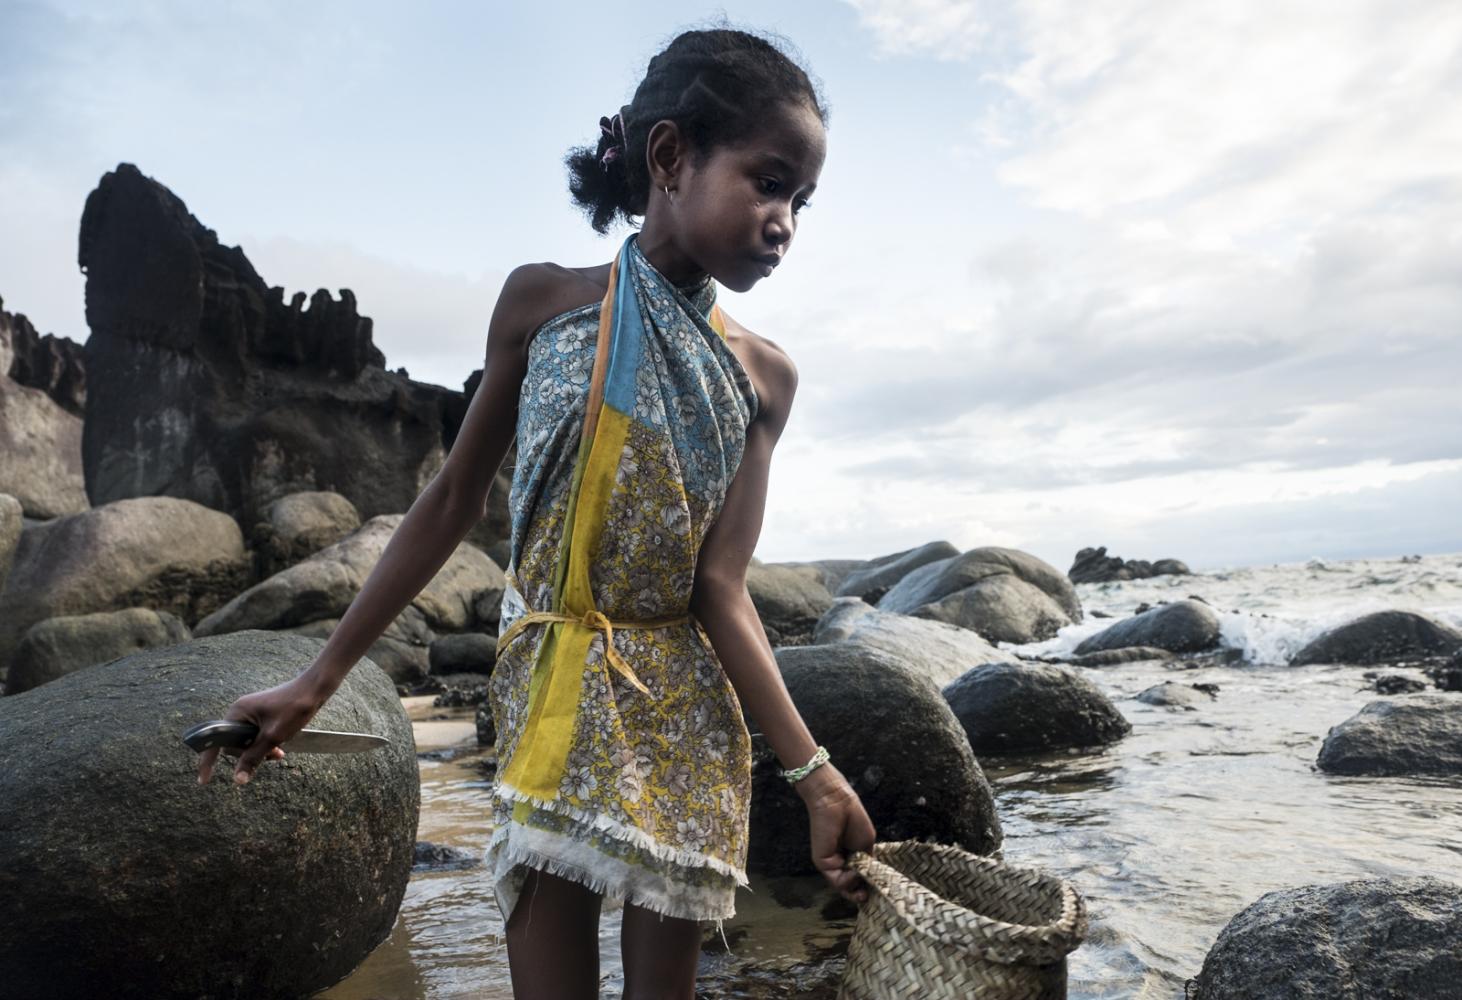 HEALTH - Patricia is a 13yr old who lives in the coastal village...